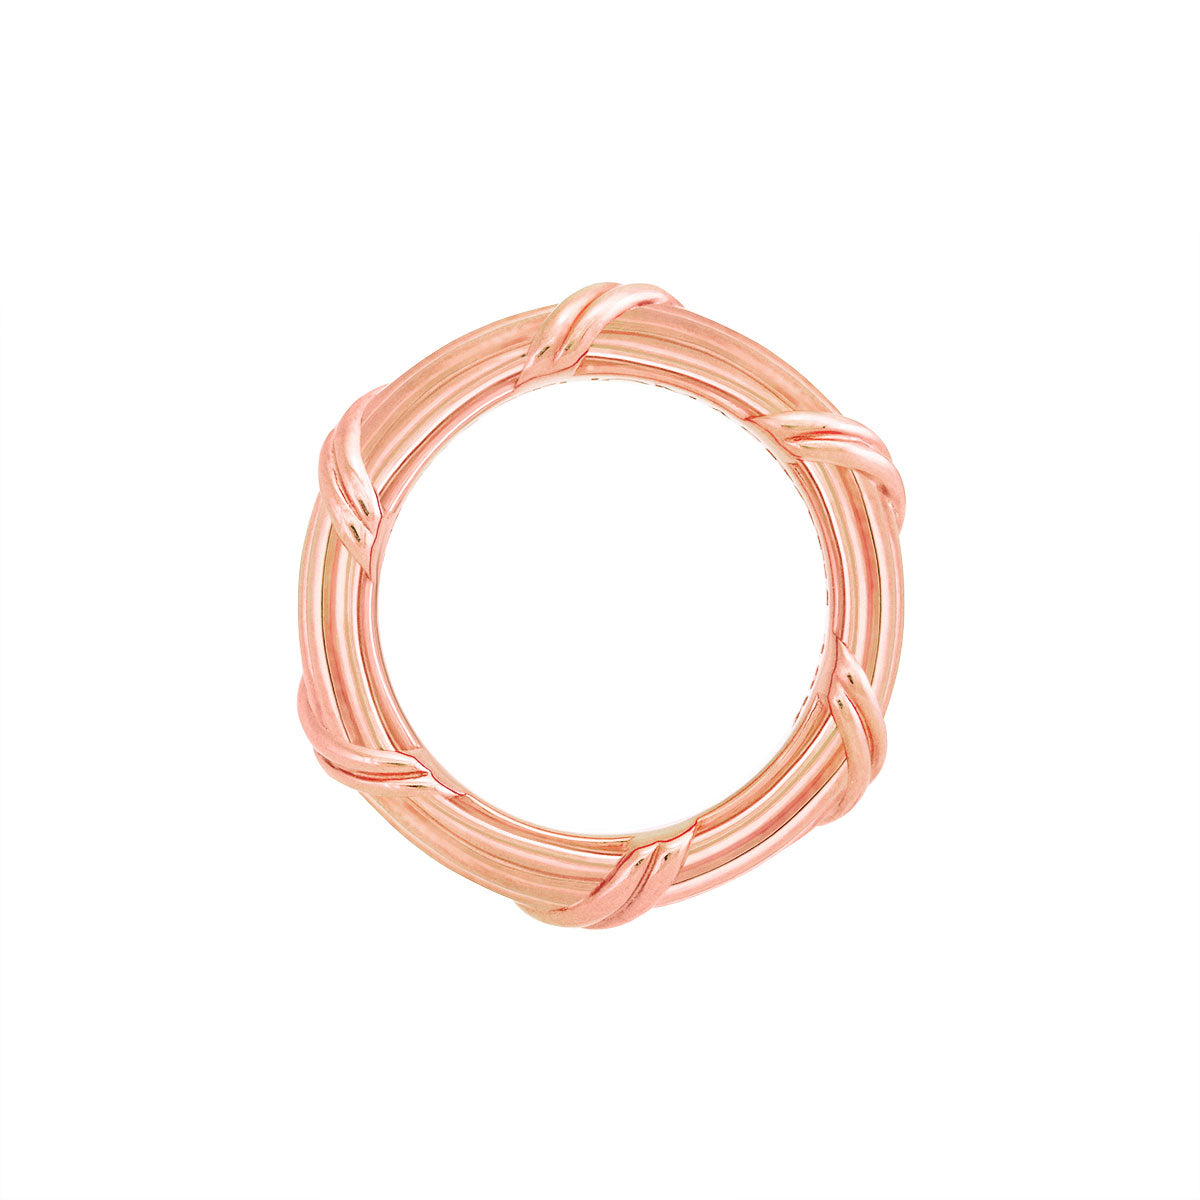 Heritage Band Ring in 18K rose gold 4 mm sizes 11 - 14